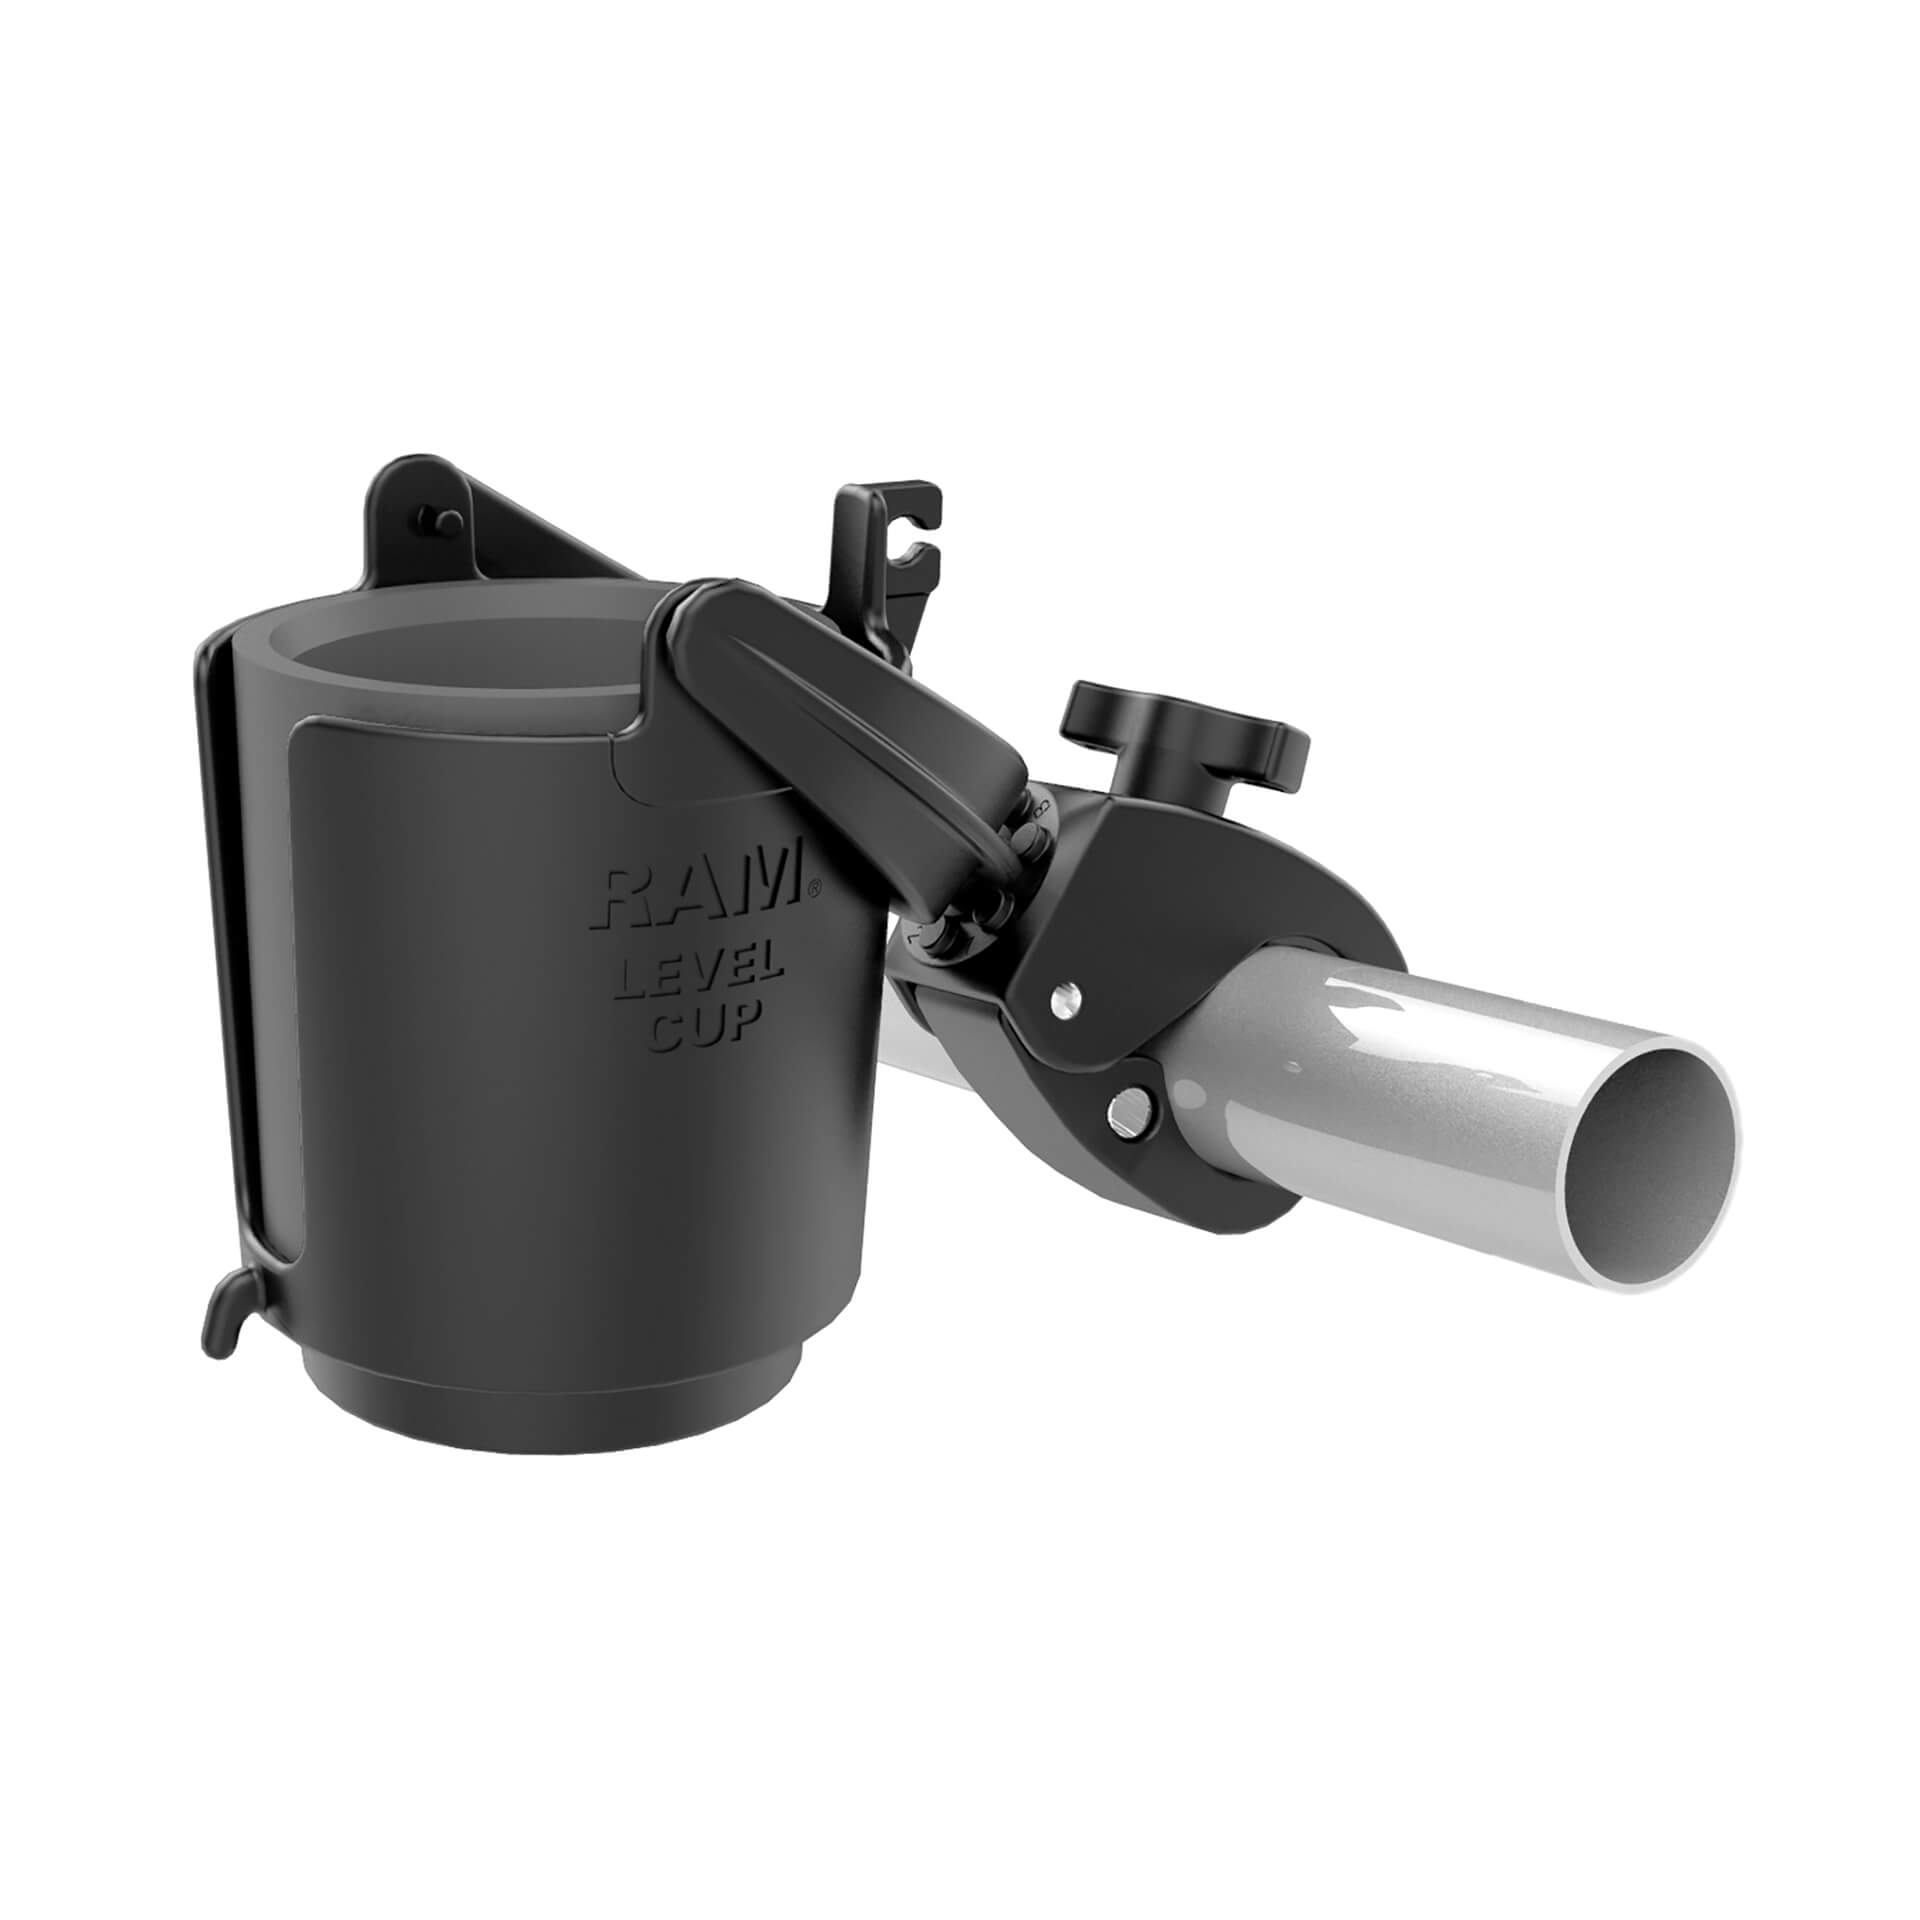 RAM Mounts Tough-Claw drink holder - with Tough-Claw, B-ball (1 inch) unisex